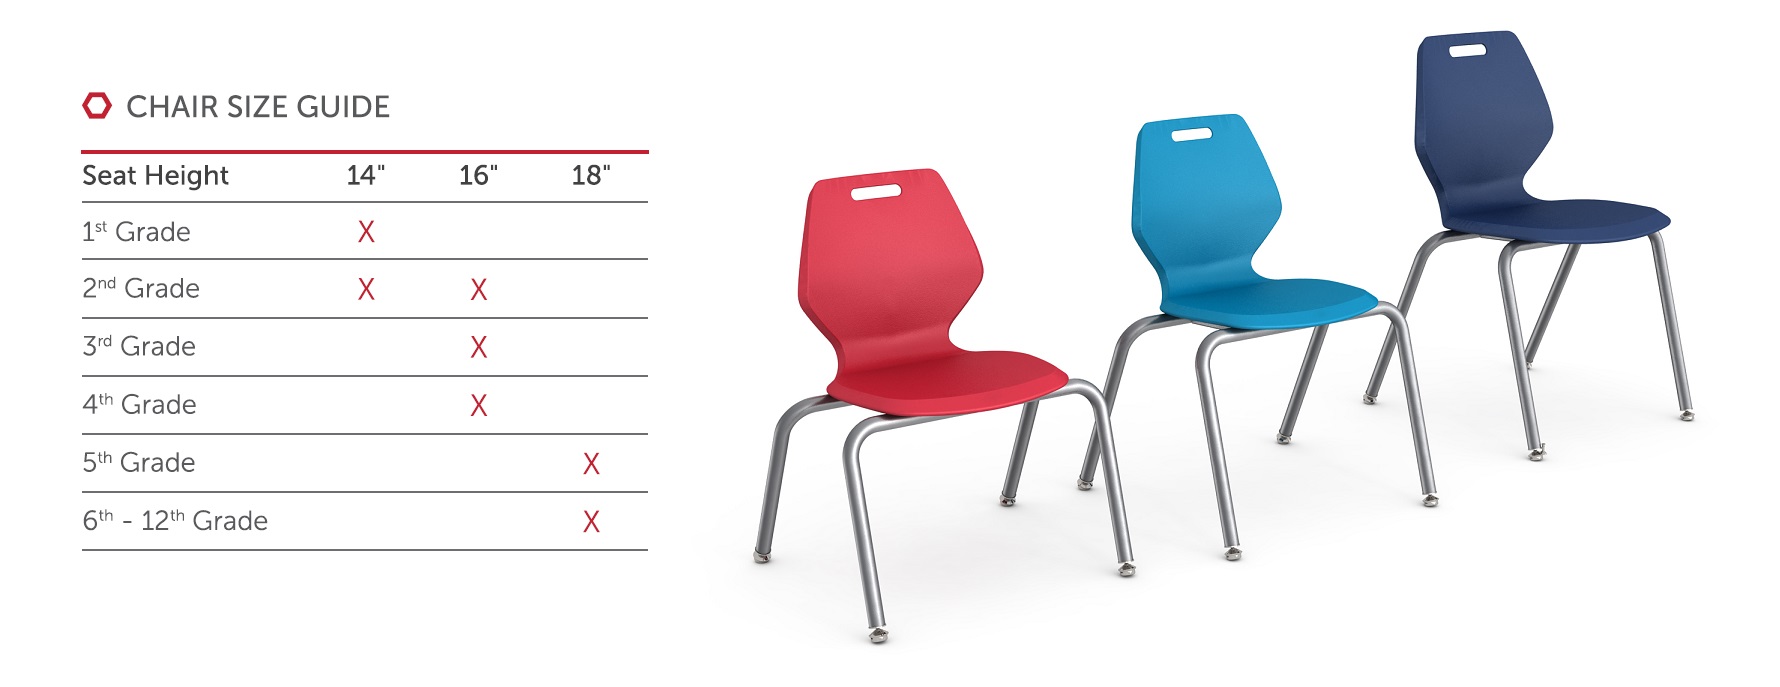 READY CHAIR SIZE GUIDE - PARAGON FURNITURE